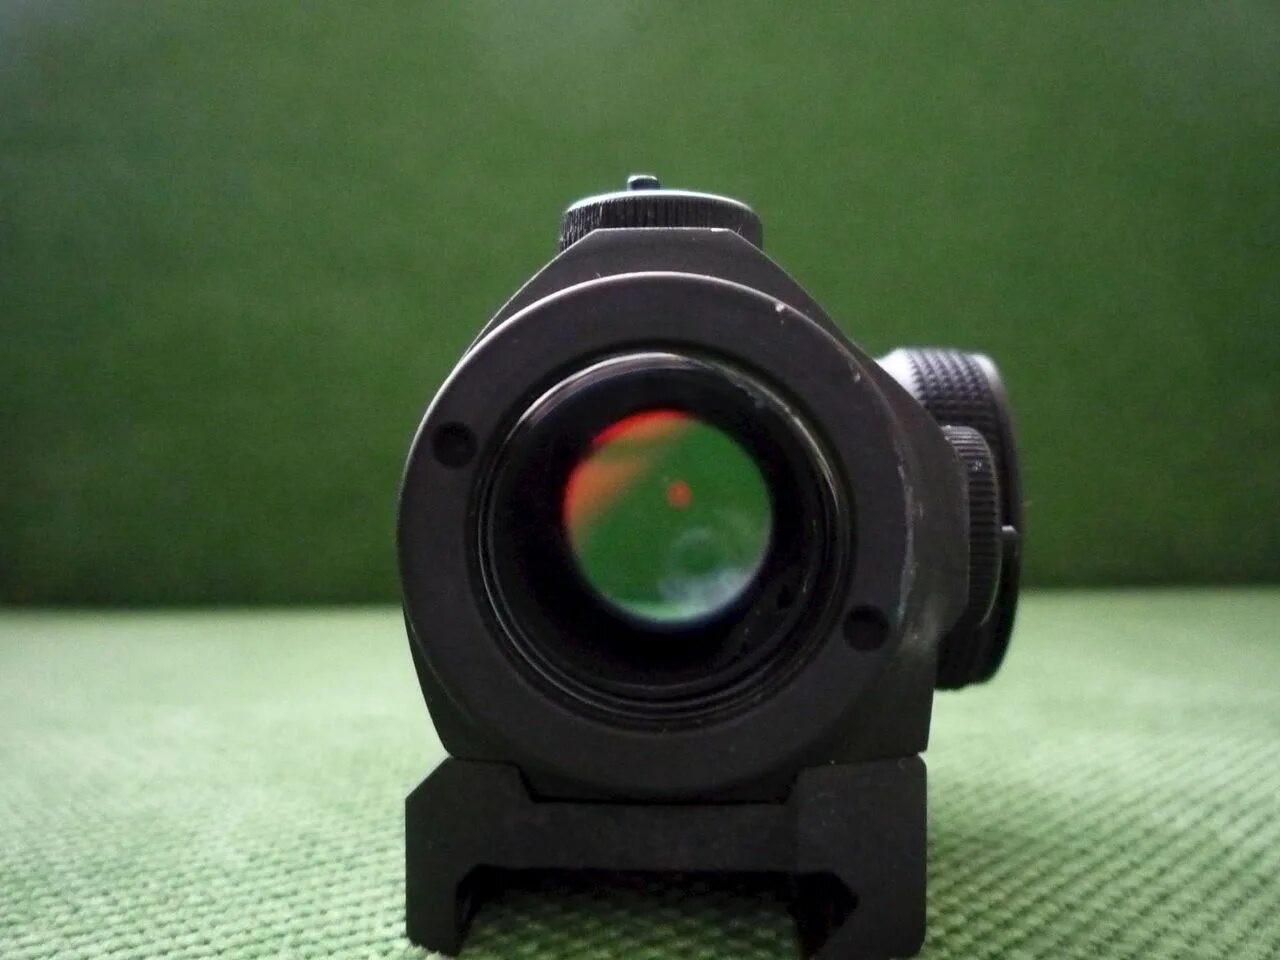 Микро т. Aimpoint Micro t-1. «Aimpoint Micro т-1». Aimpoint Micro h1 t1. Прицел Aimpoint Micro.